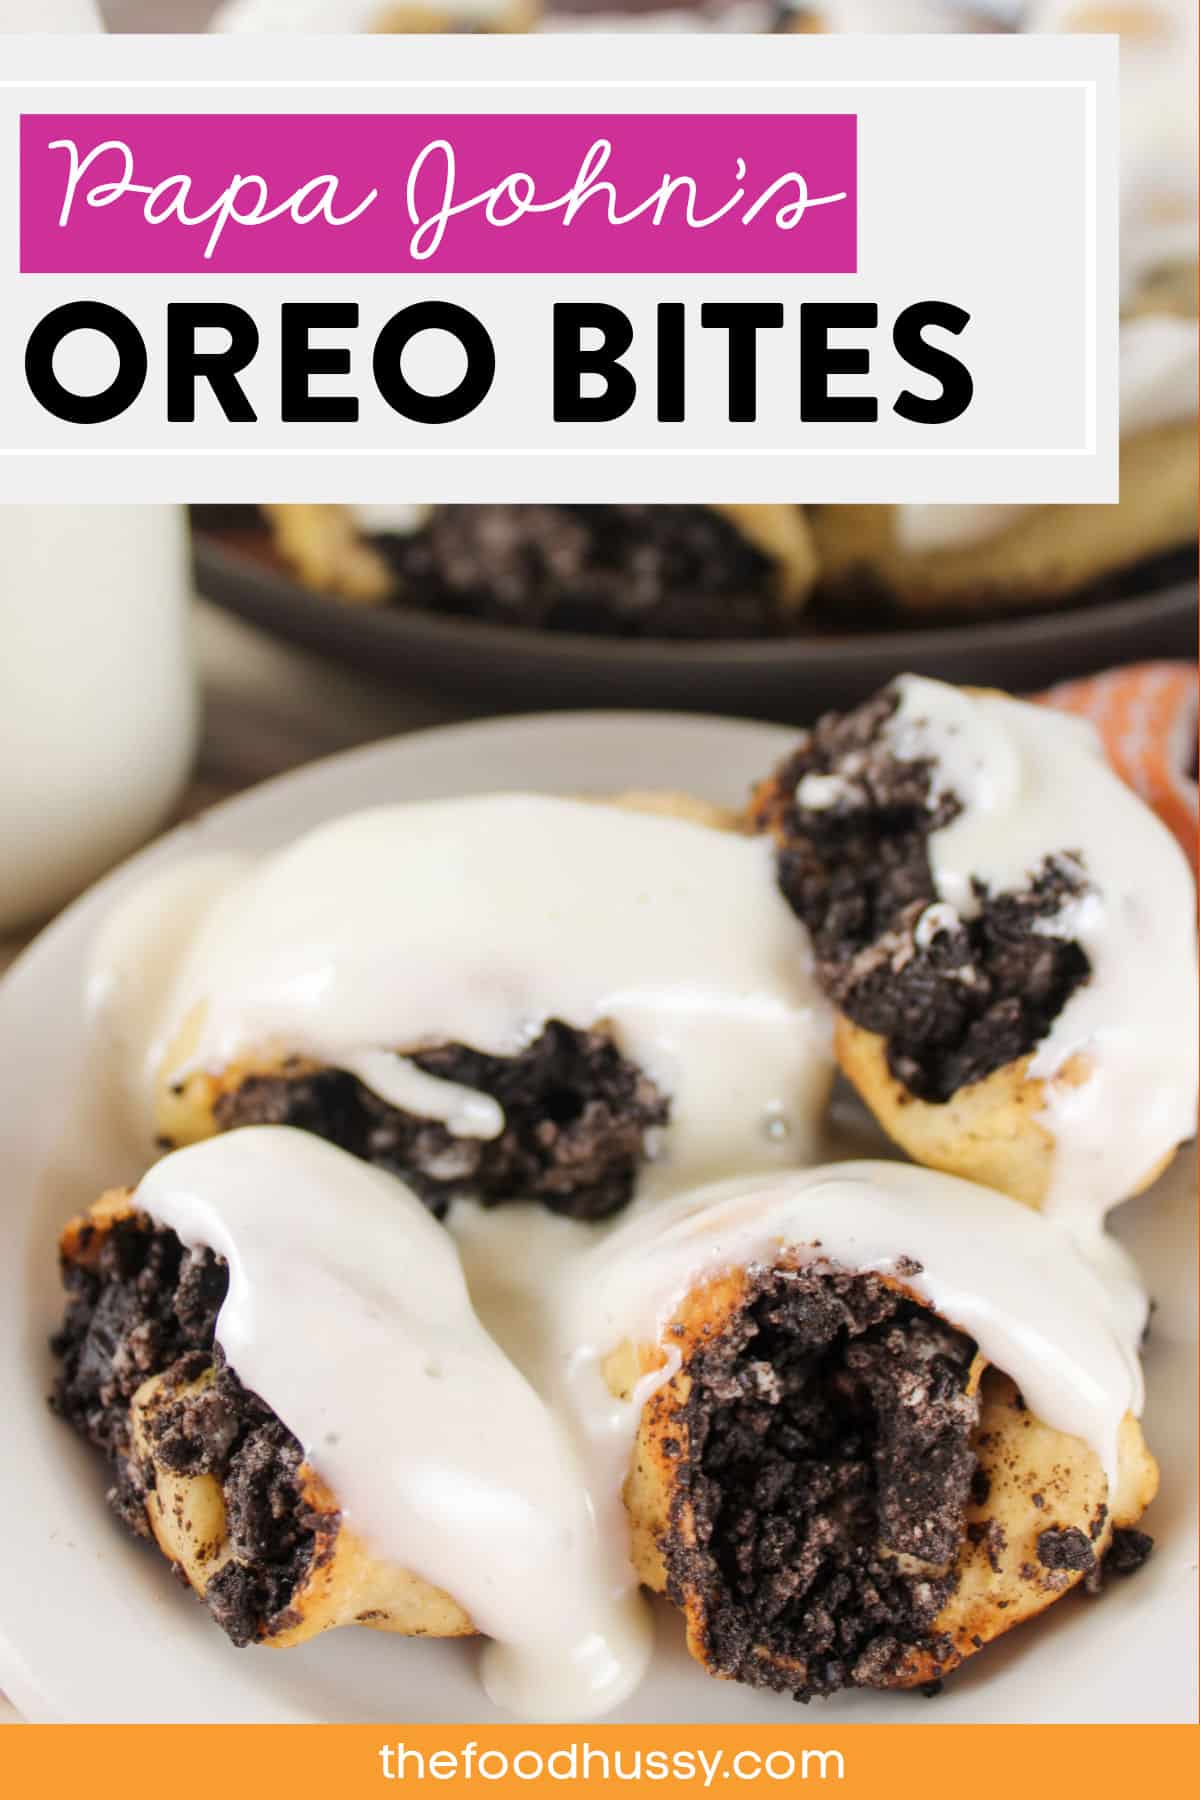 Papa John's Oreo Bites are a limited time menu offering in the restaurant - but now you can make them whenever you want at home. And the best part - my recipe costs less than one order and makes 4X the bites!!!  via @foodhussy